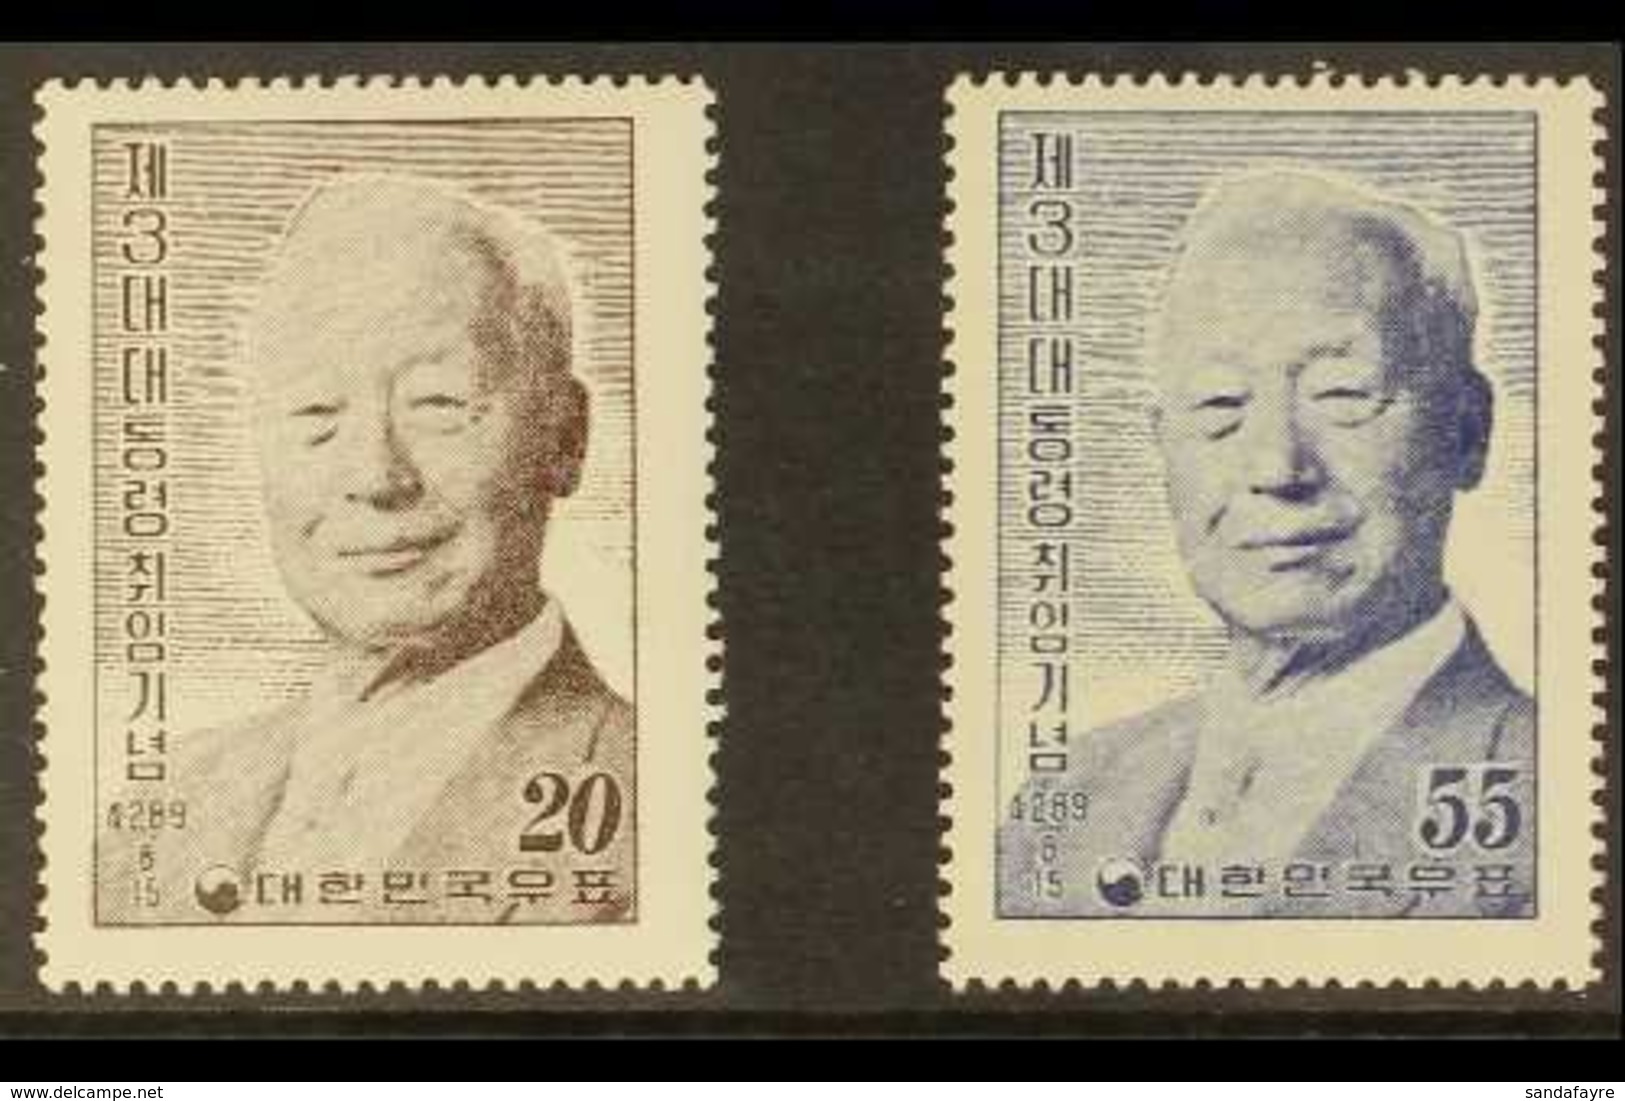 1956 Presidents Election Complete Set, SG 261/262, Very Fine Mint. (2 Stamps) For More Images, Please Visit Http://www.s - Korea, South